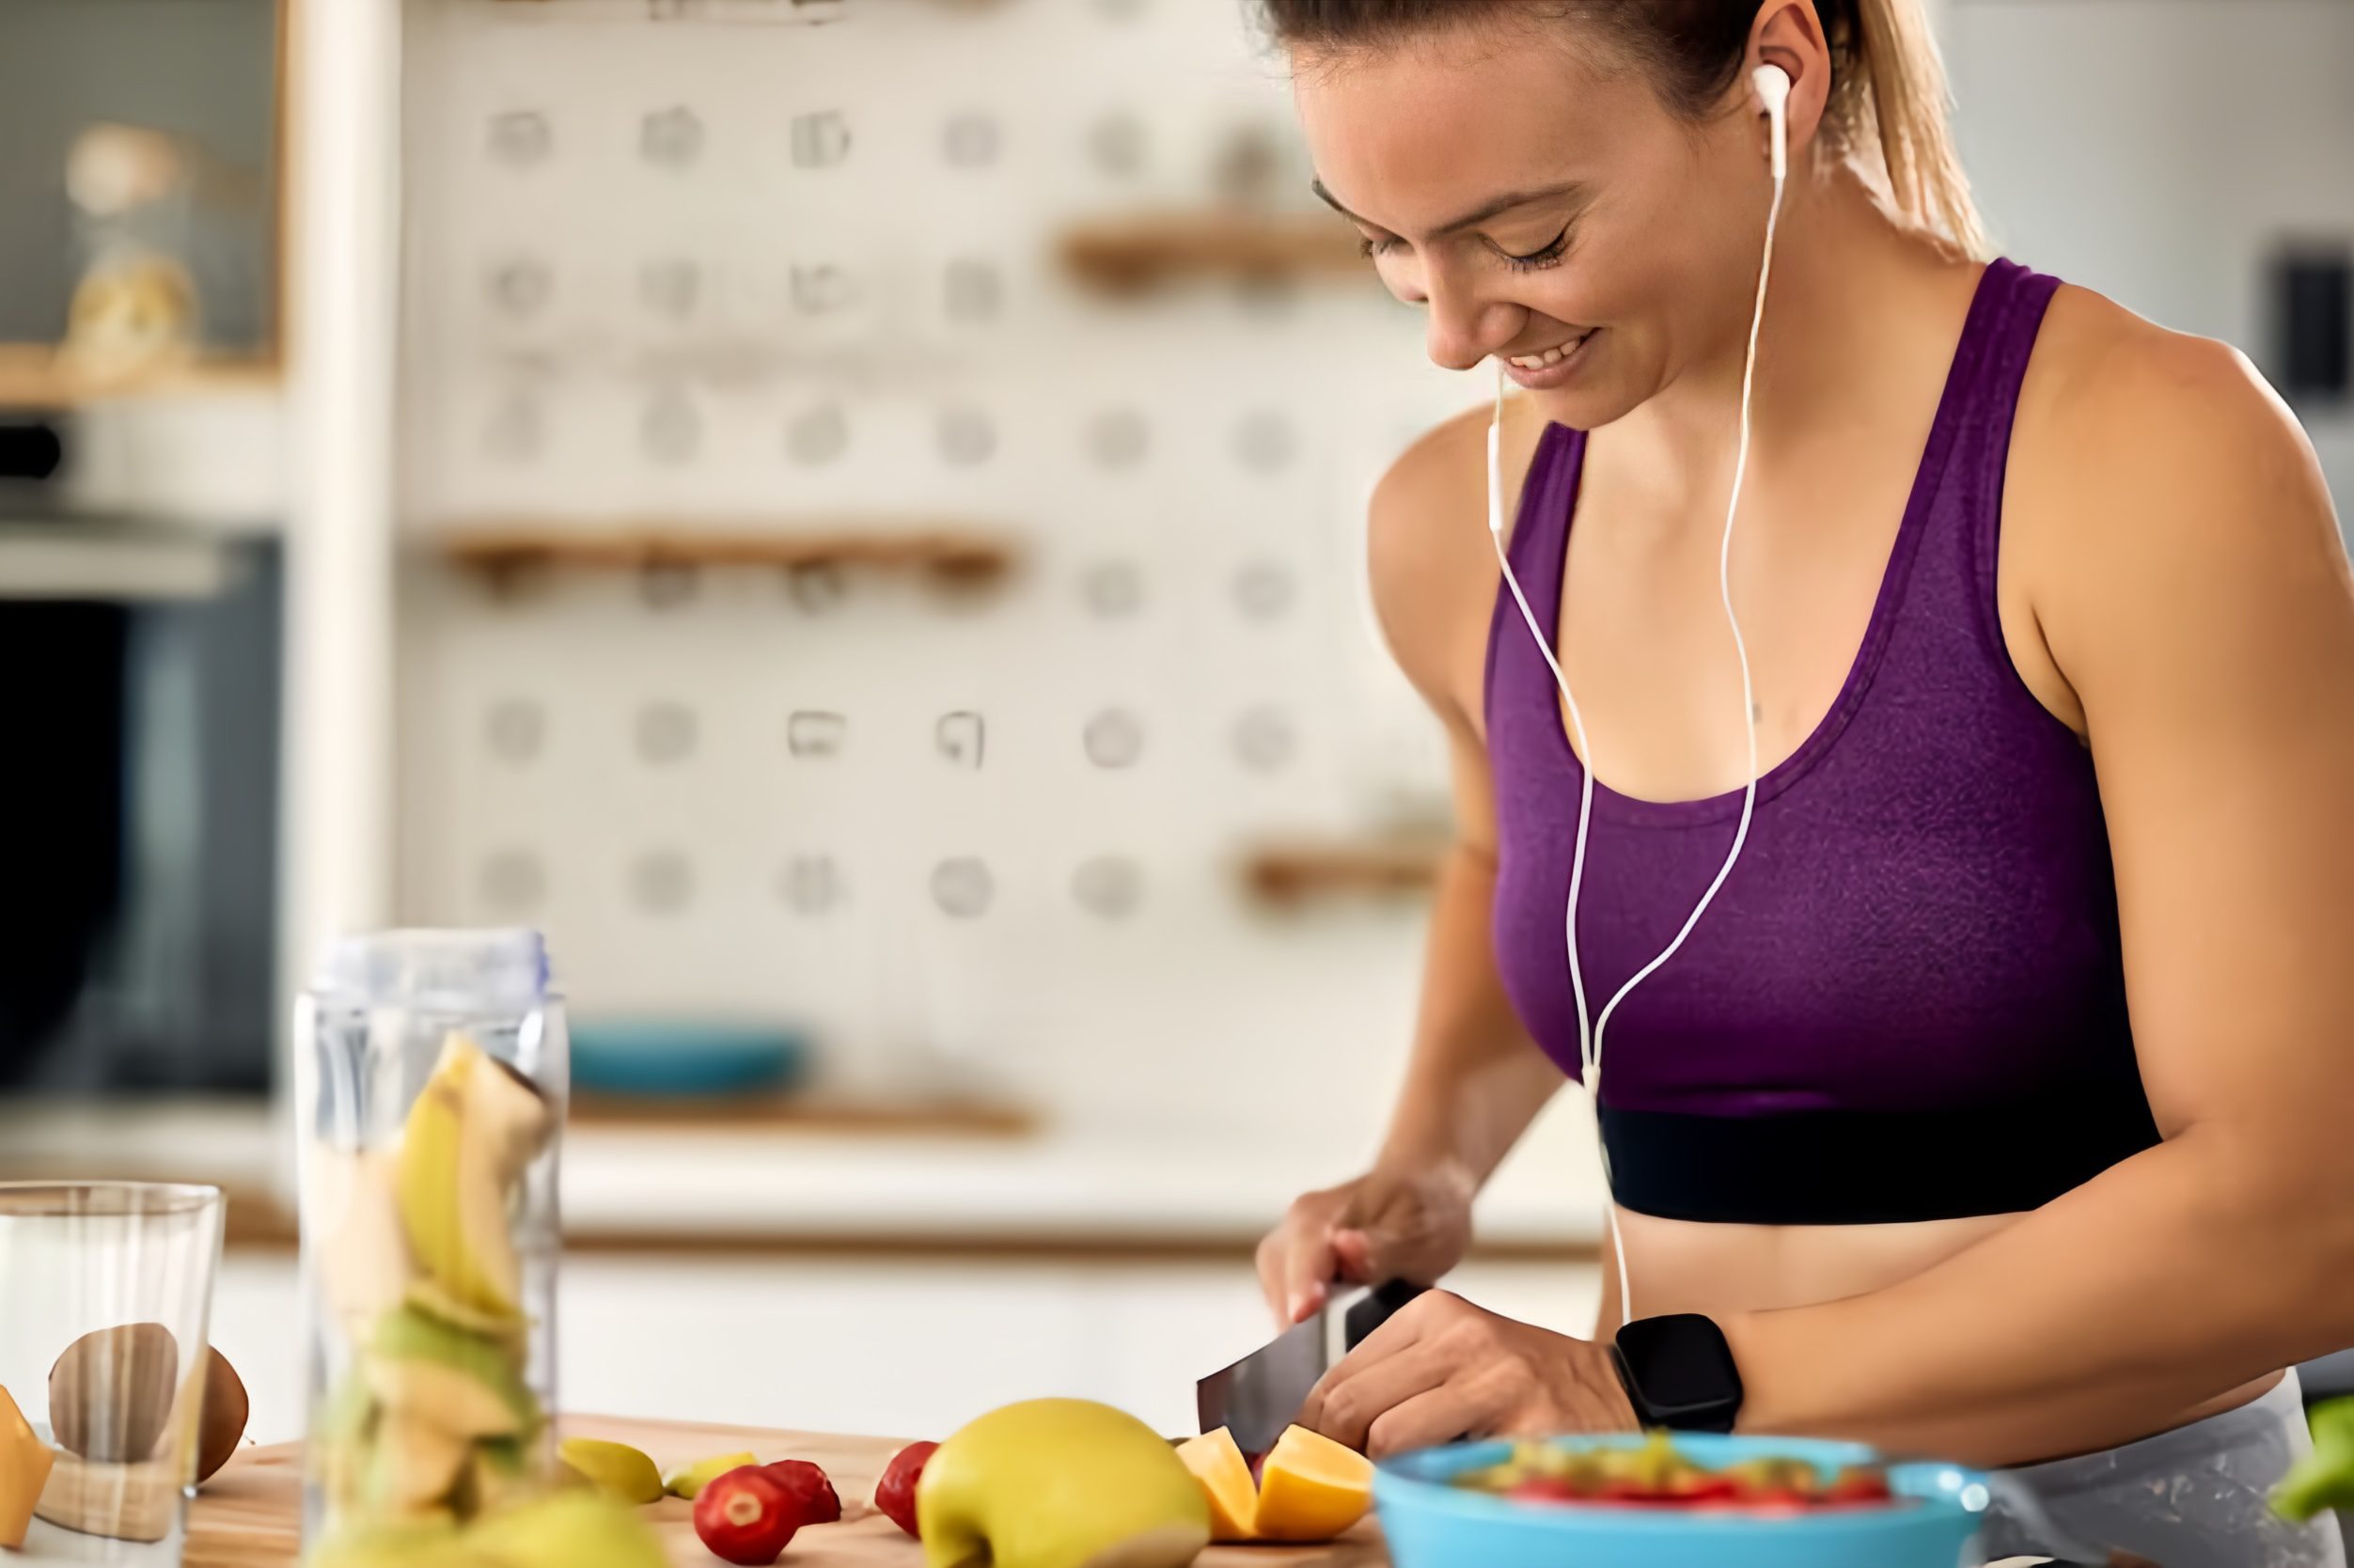 Mindful Eating Exercise: What are the Benefits?